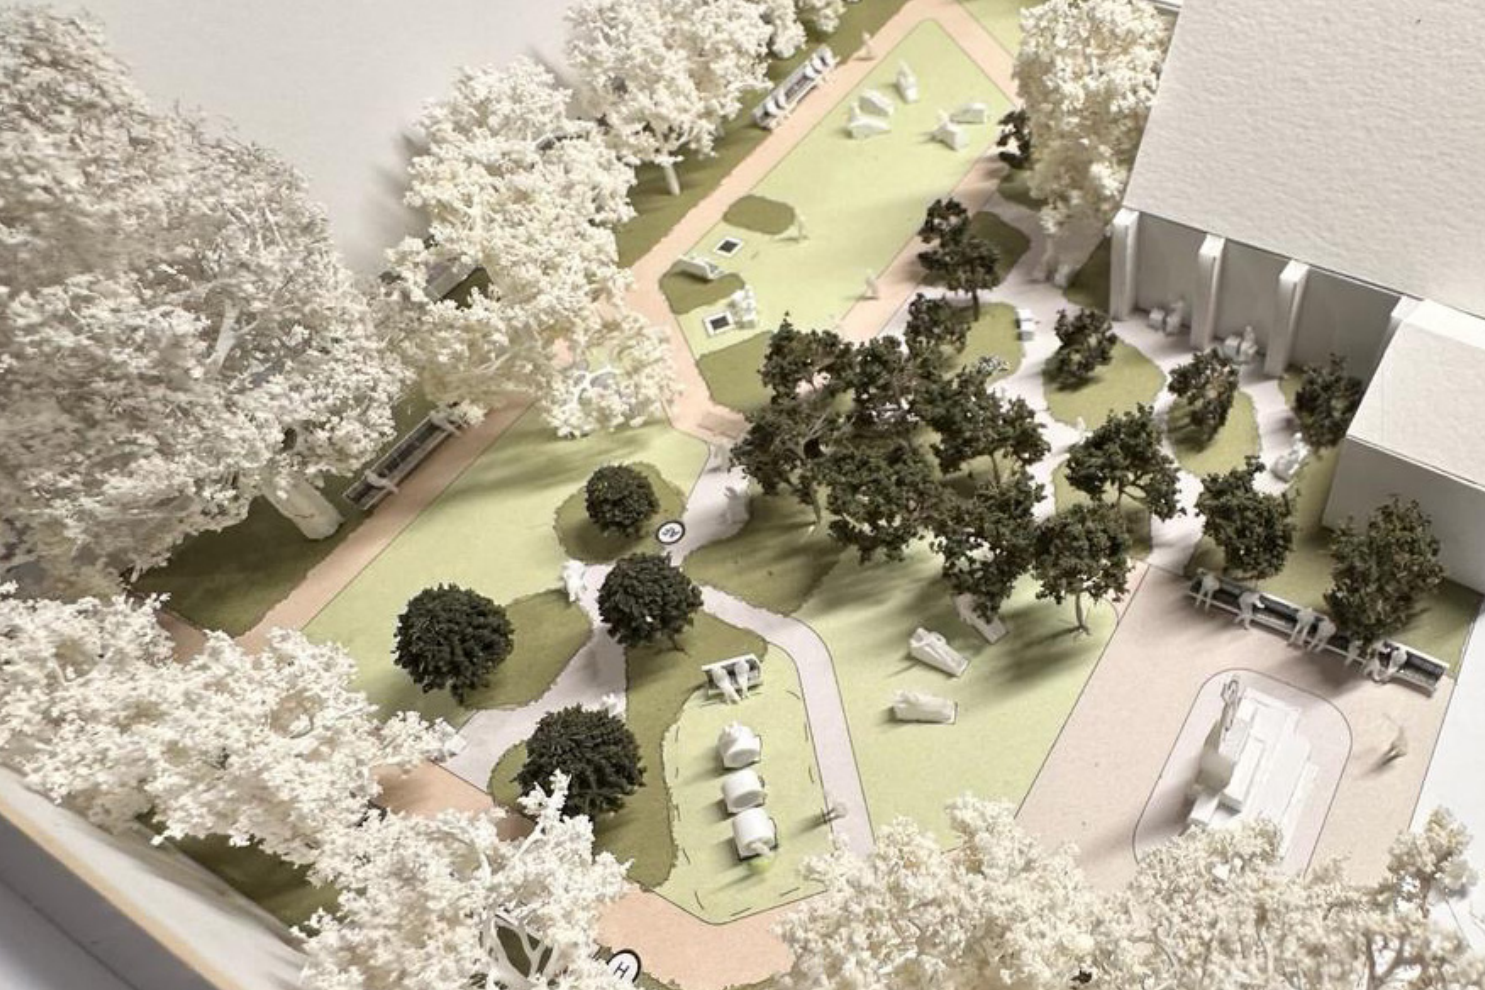 Image showing small scale model, with trees and seating, with pathways and grassed areas marked. 